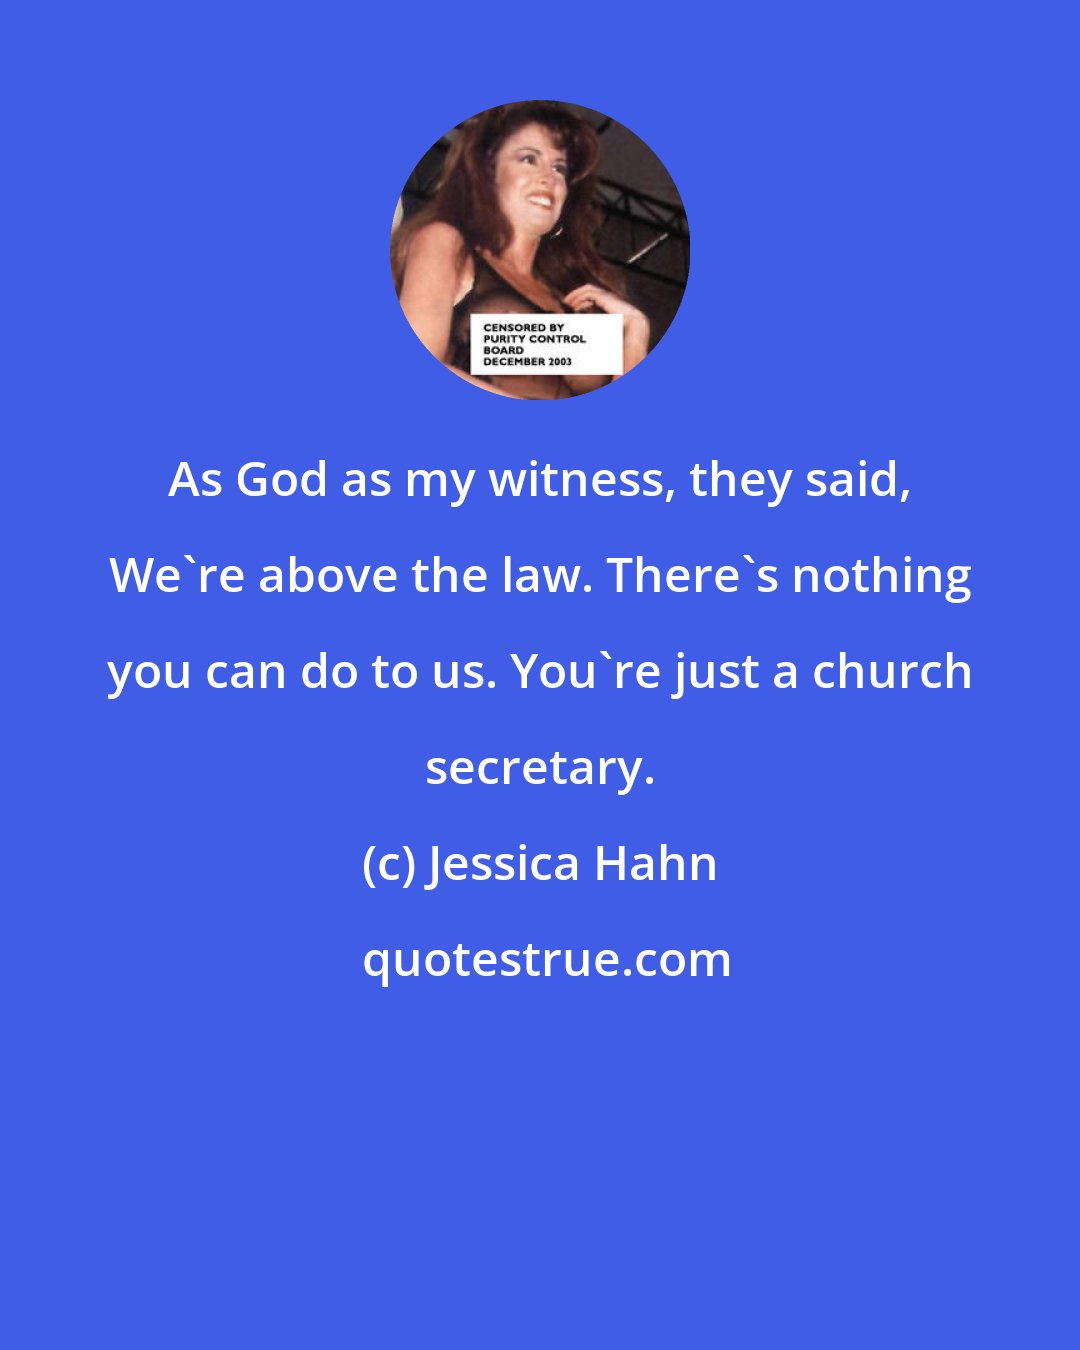 Jessica Hahn: As God as my witness, they said, We're above the law. There's nothing you can do to us. You're just a church secretary.